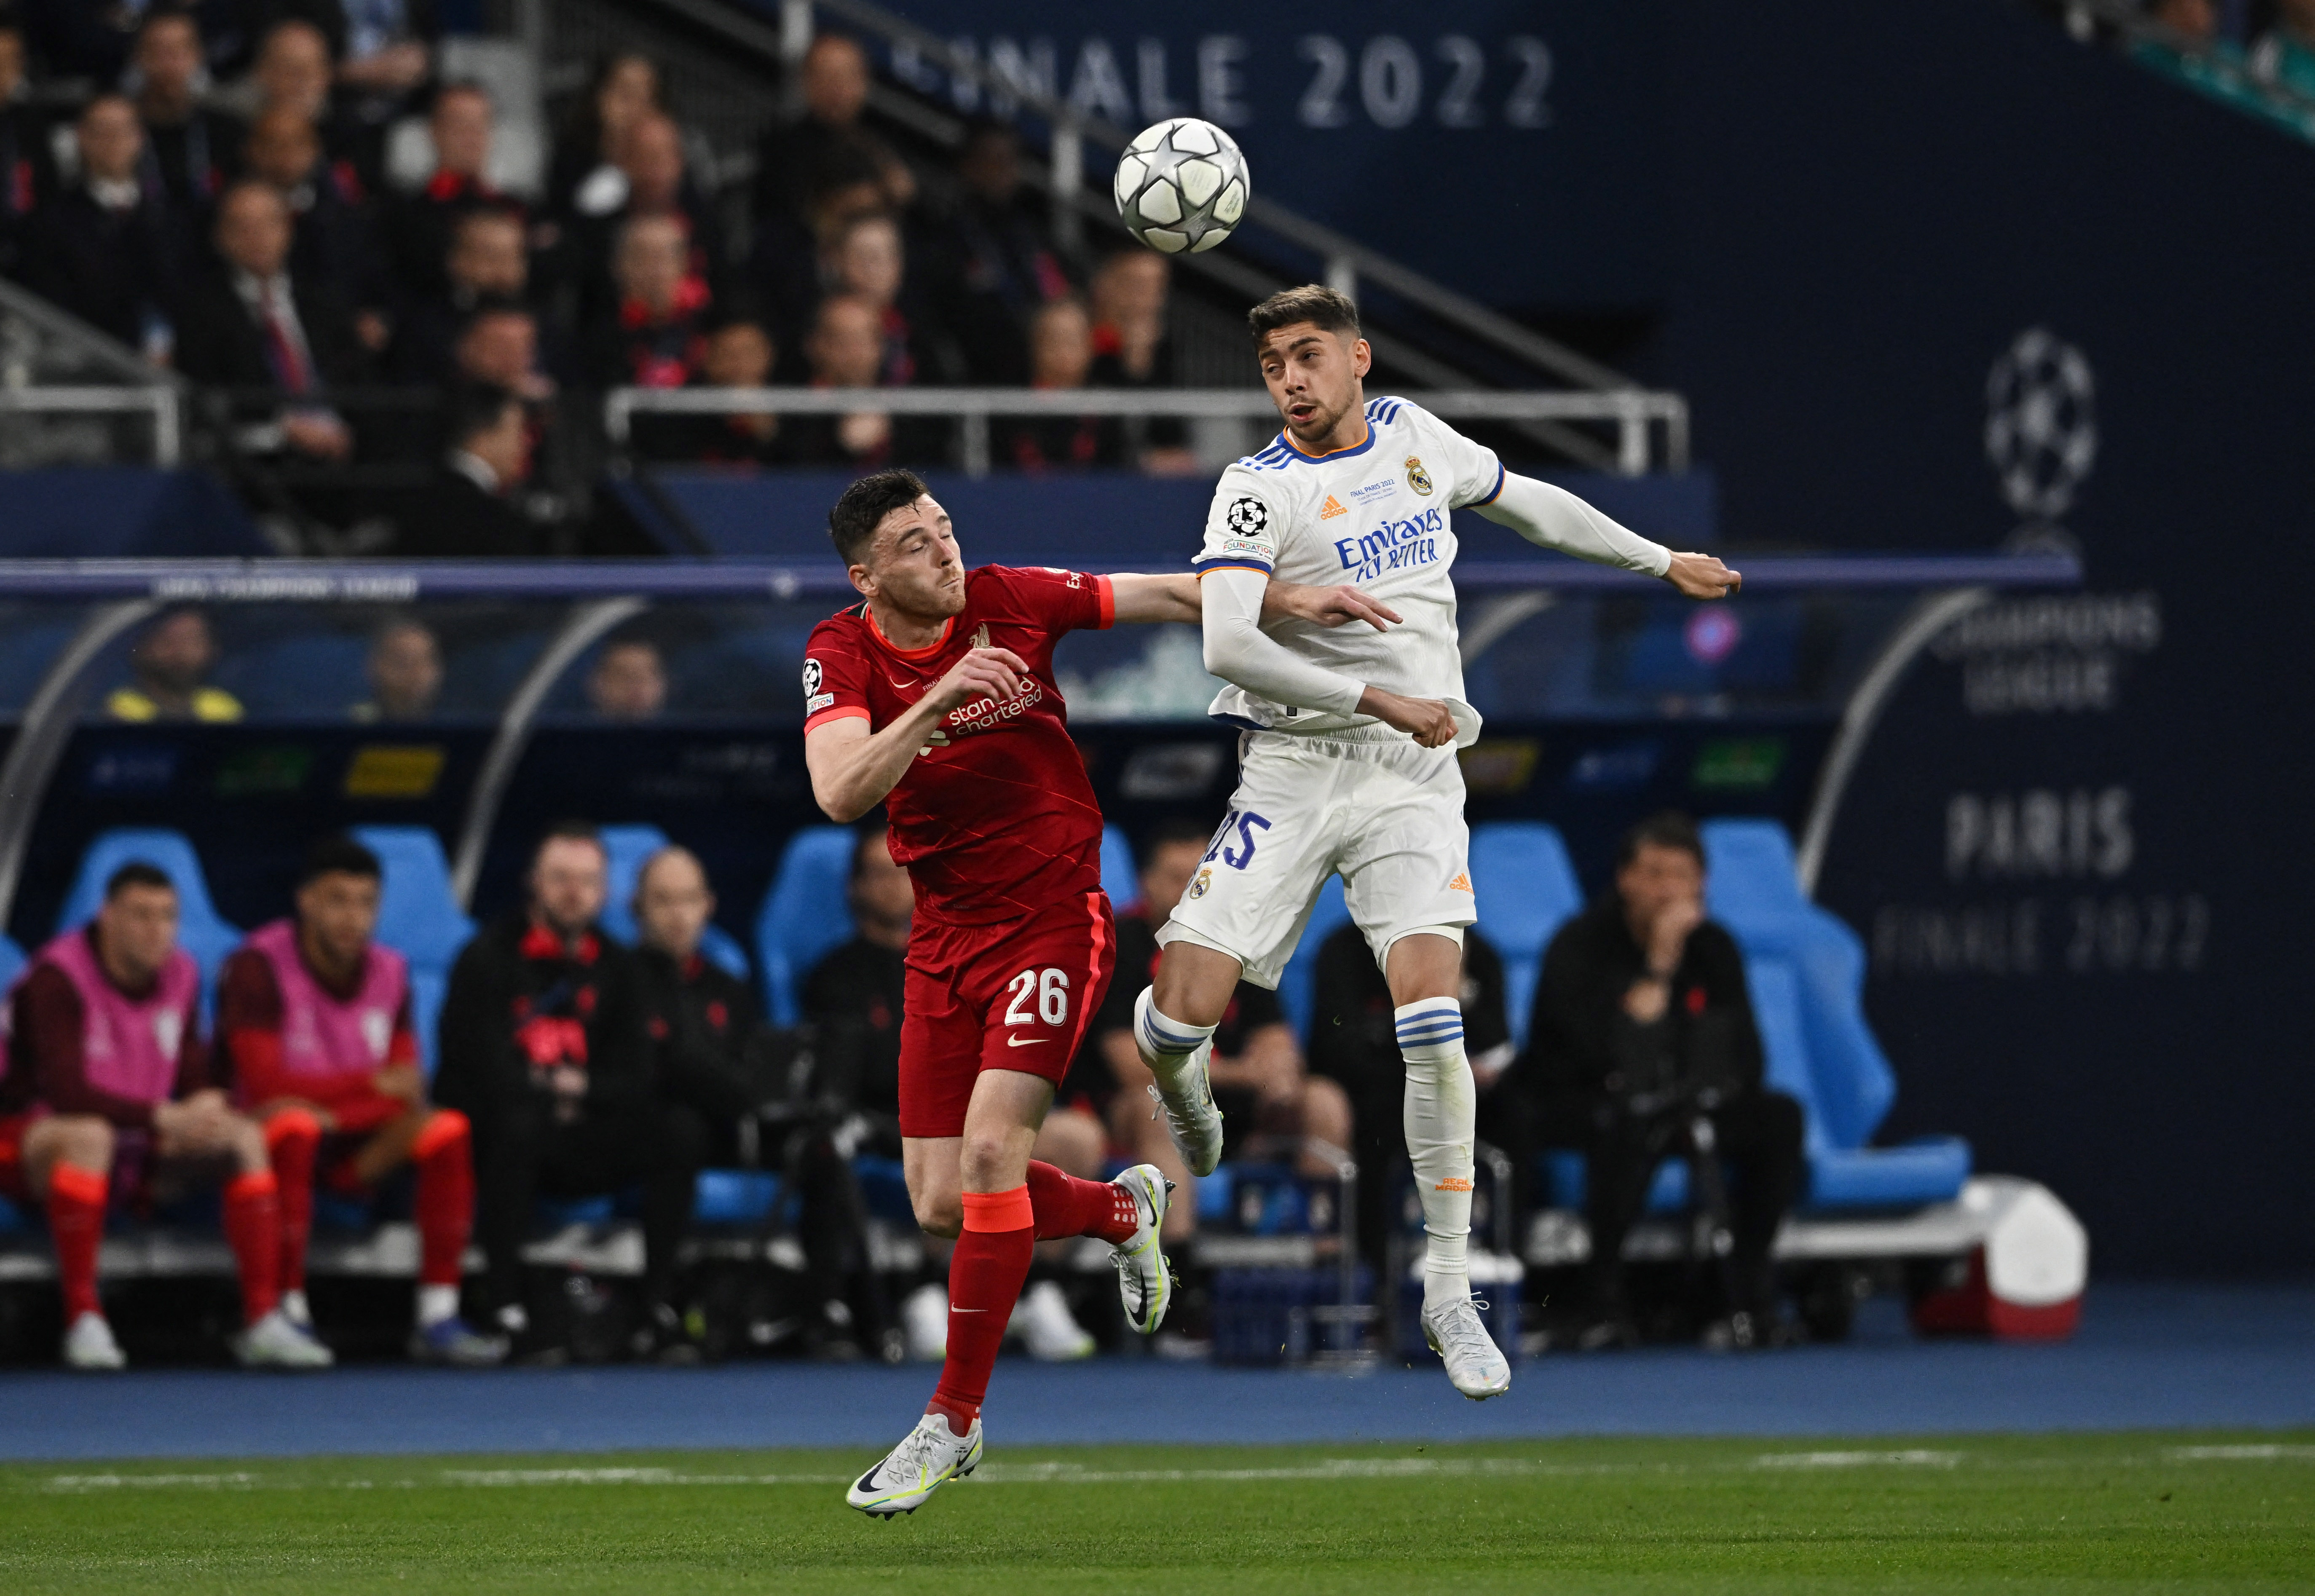 Liverpool vs Real Madrid  Champions League final build-up from Paris 